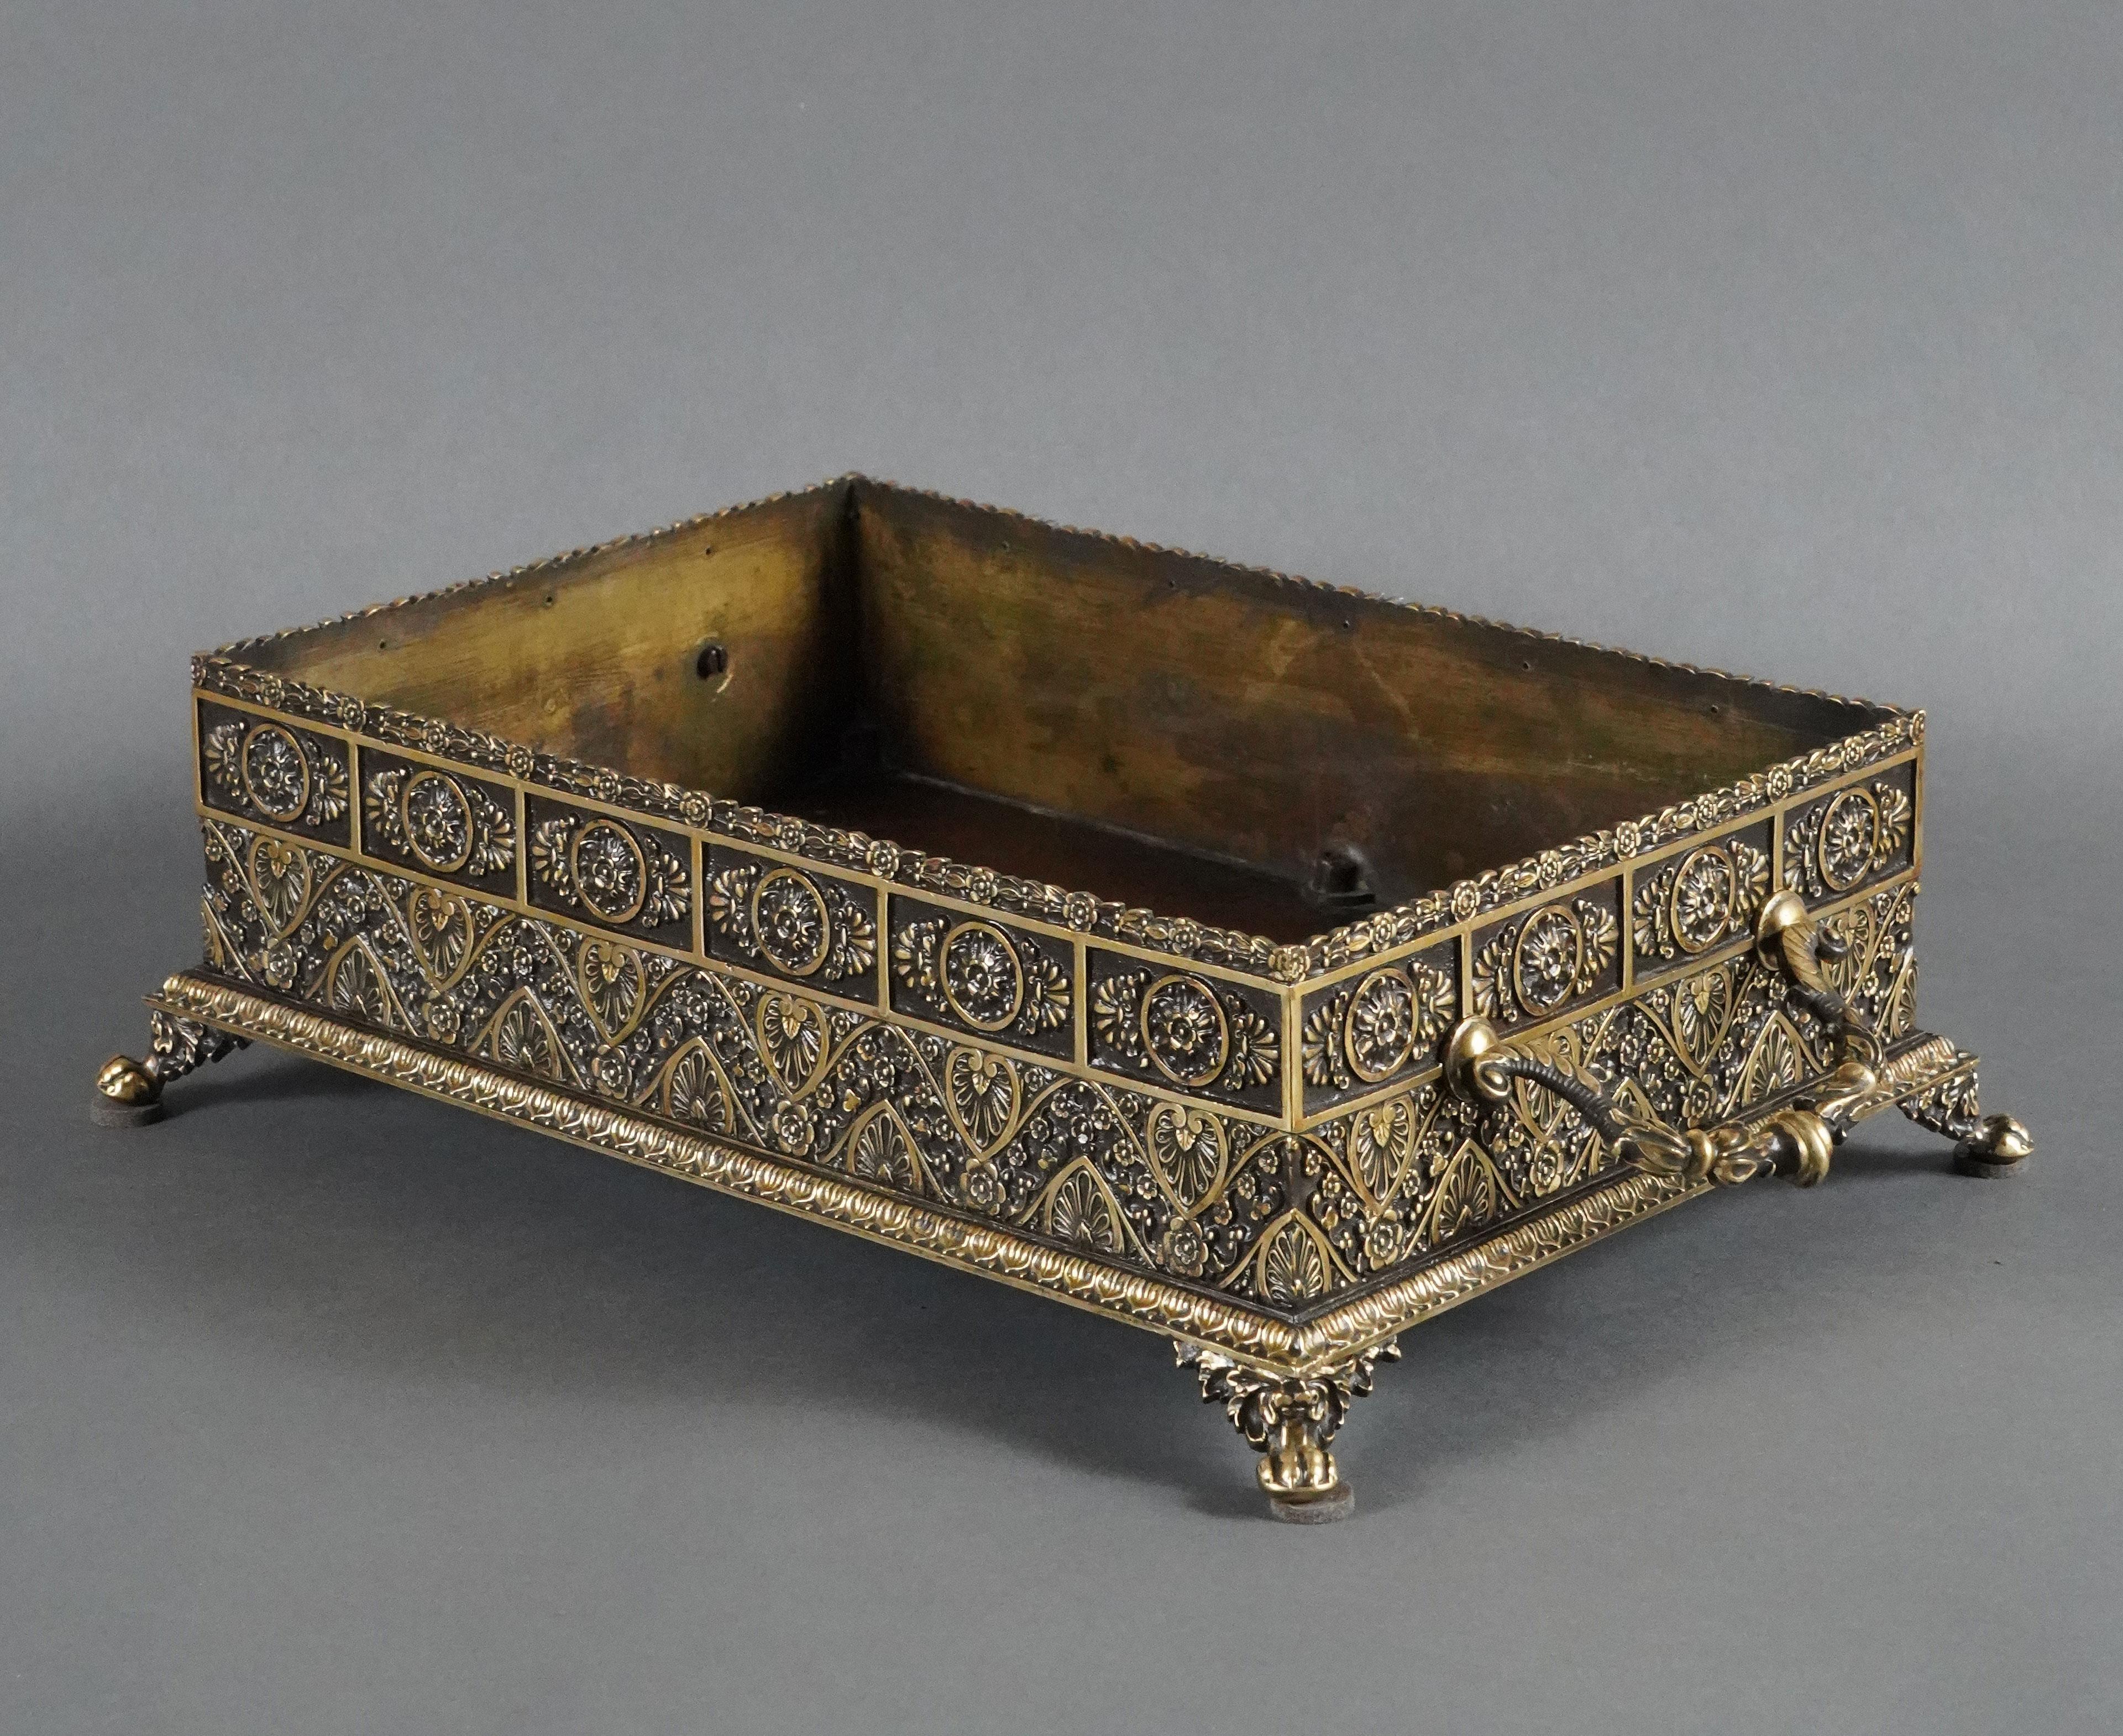 Neoclassical Revival Orientalist Style Planter, France, Circa 1870 For Sale